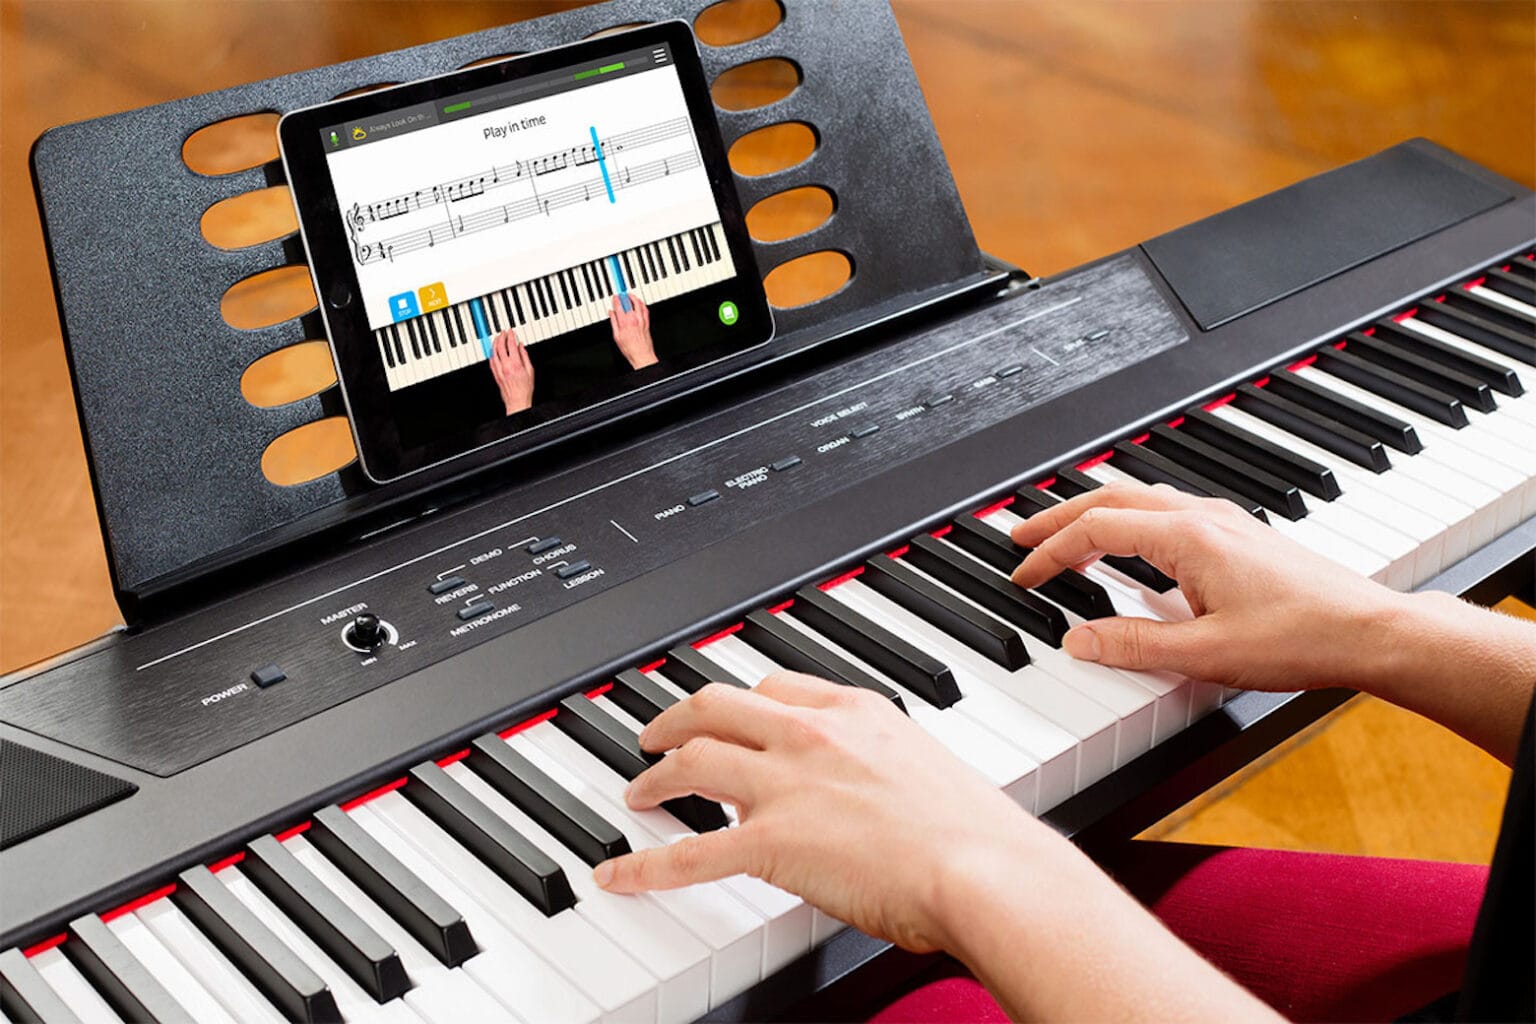 These premium piano lessons are the best deal for Cyber Monday.